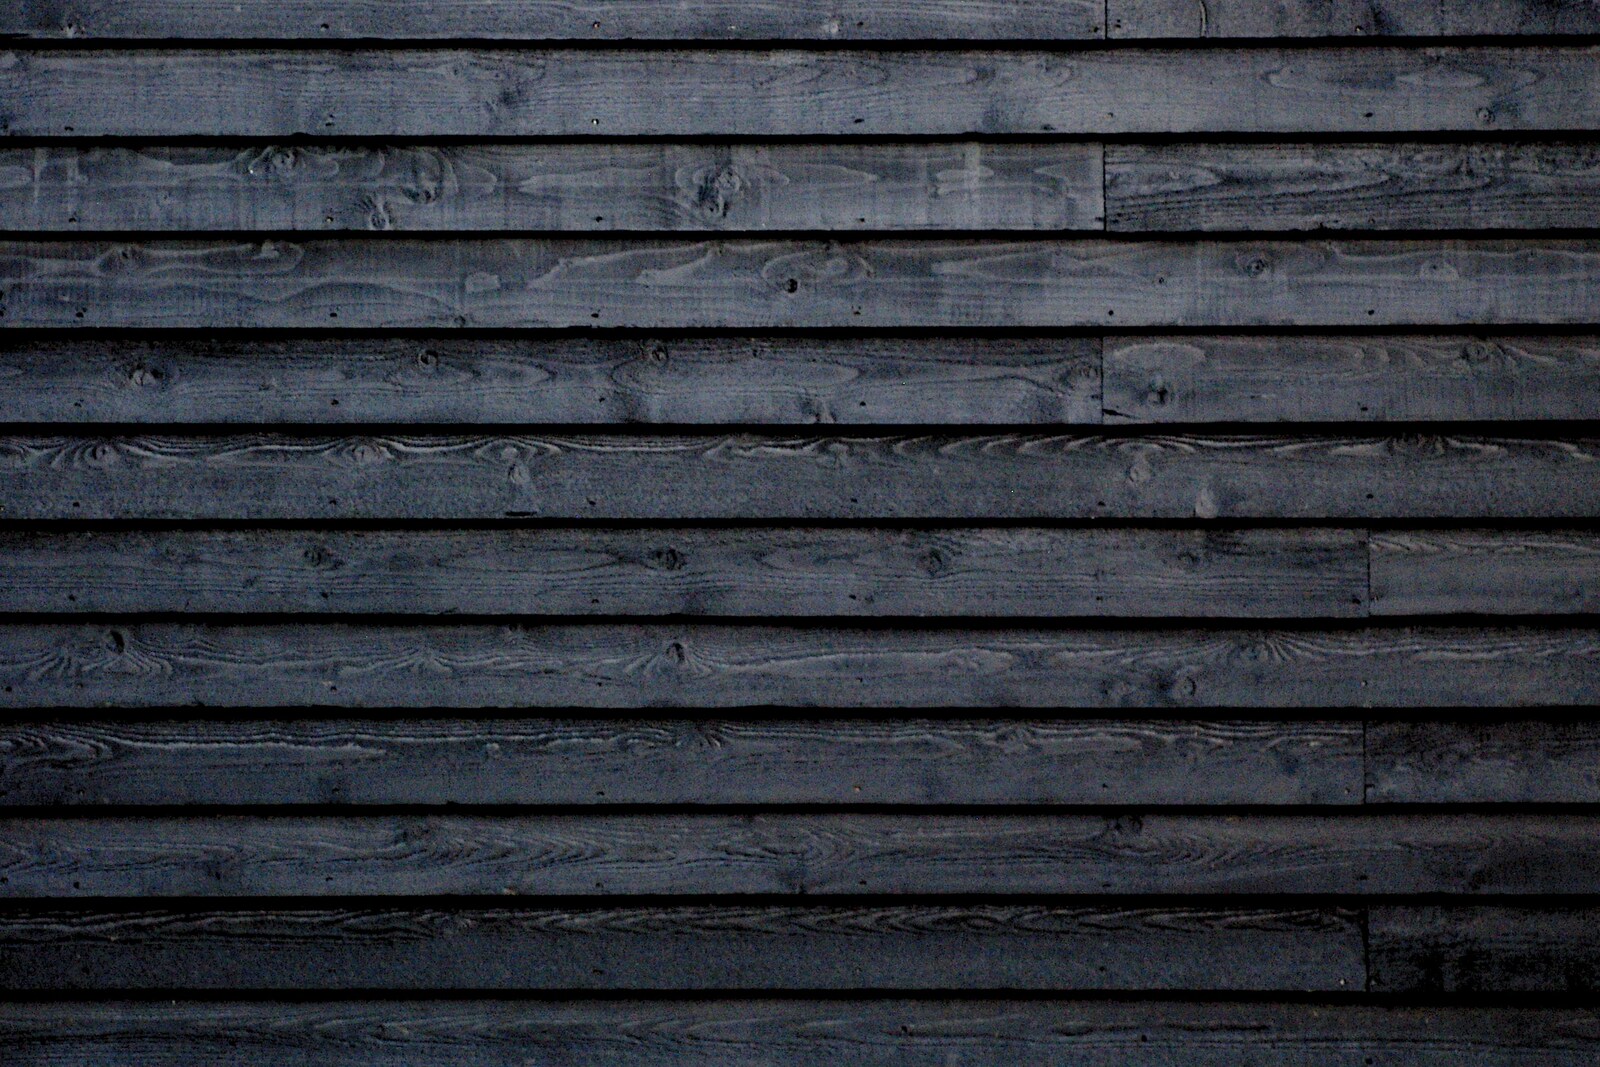 A Suffolk barn in black paint from Pheasants, Sunsets and The BBs at Bressingham, Norfolk - 11th December 2005